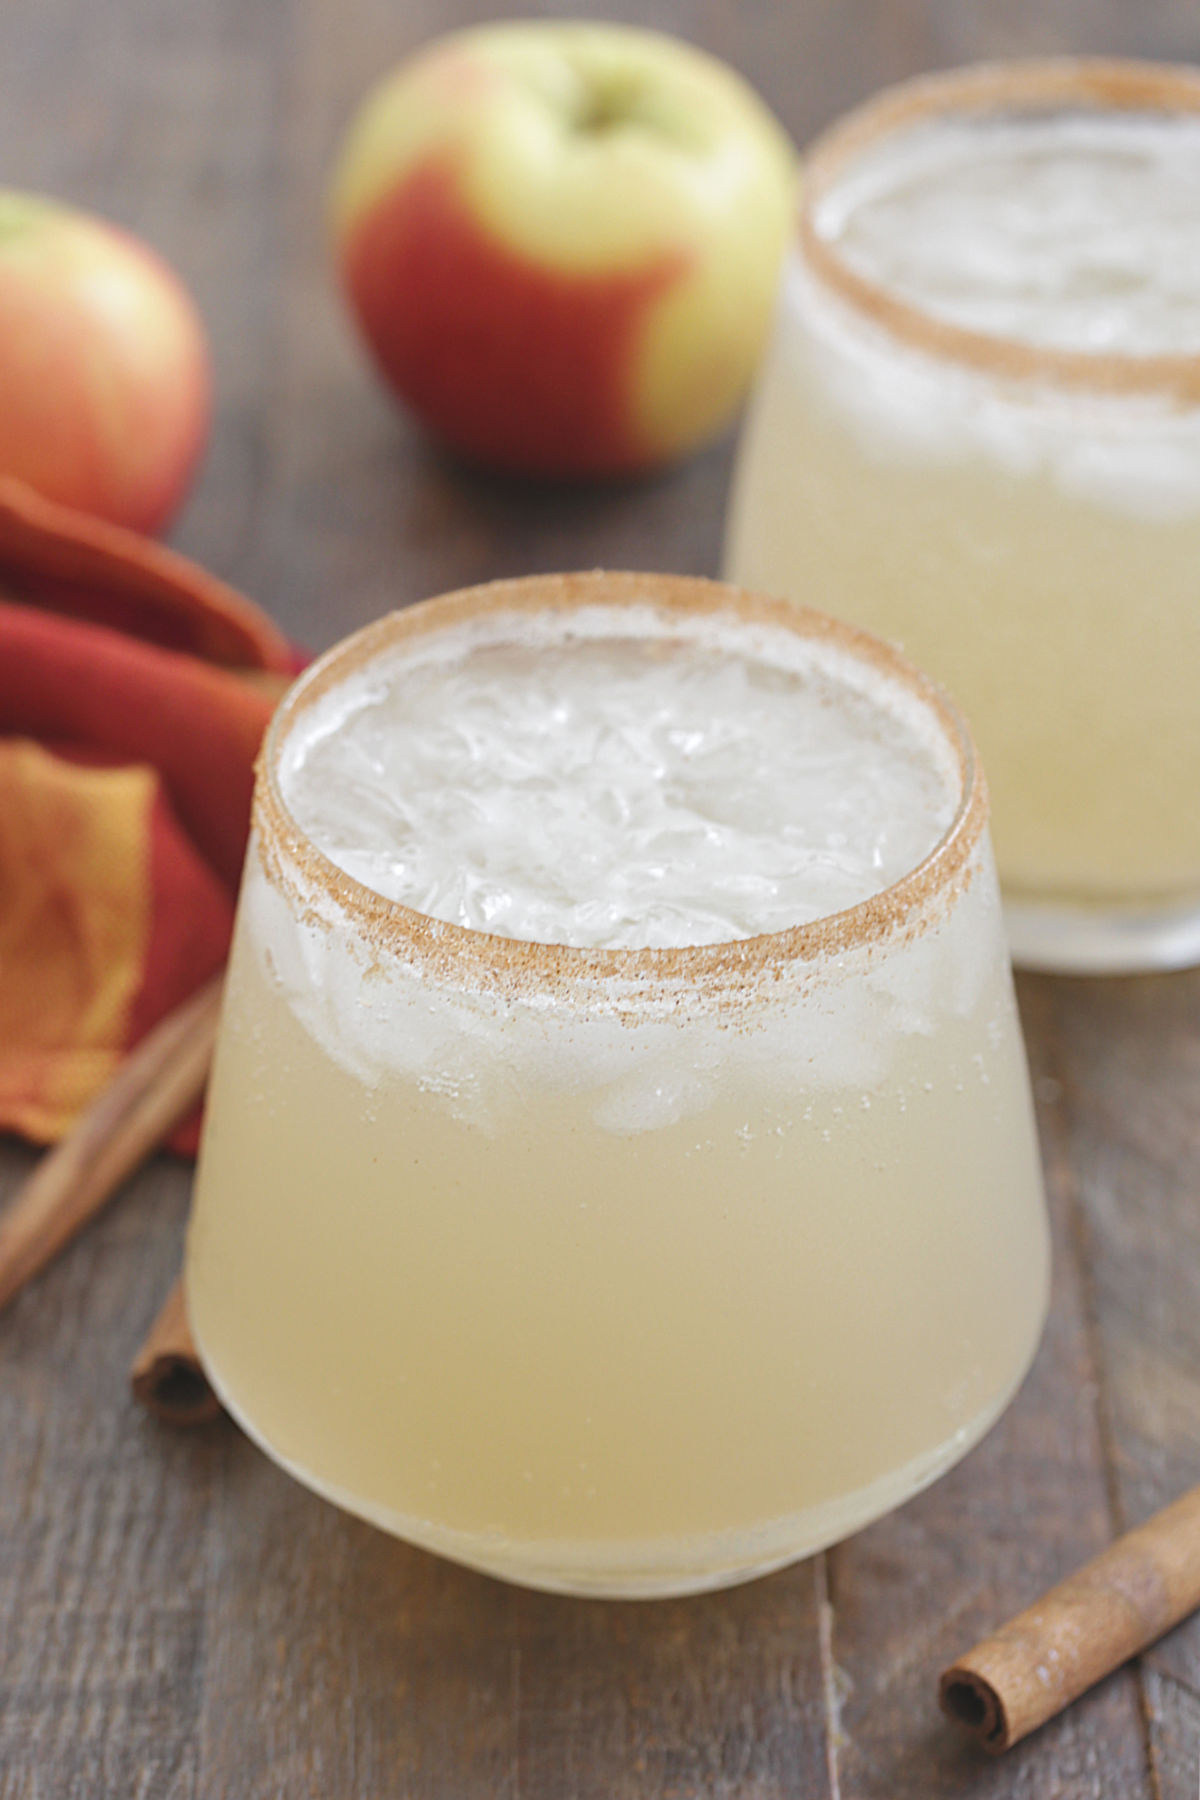 Apple Margaritas in a glass with a cinnamon sugar rim and apples